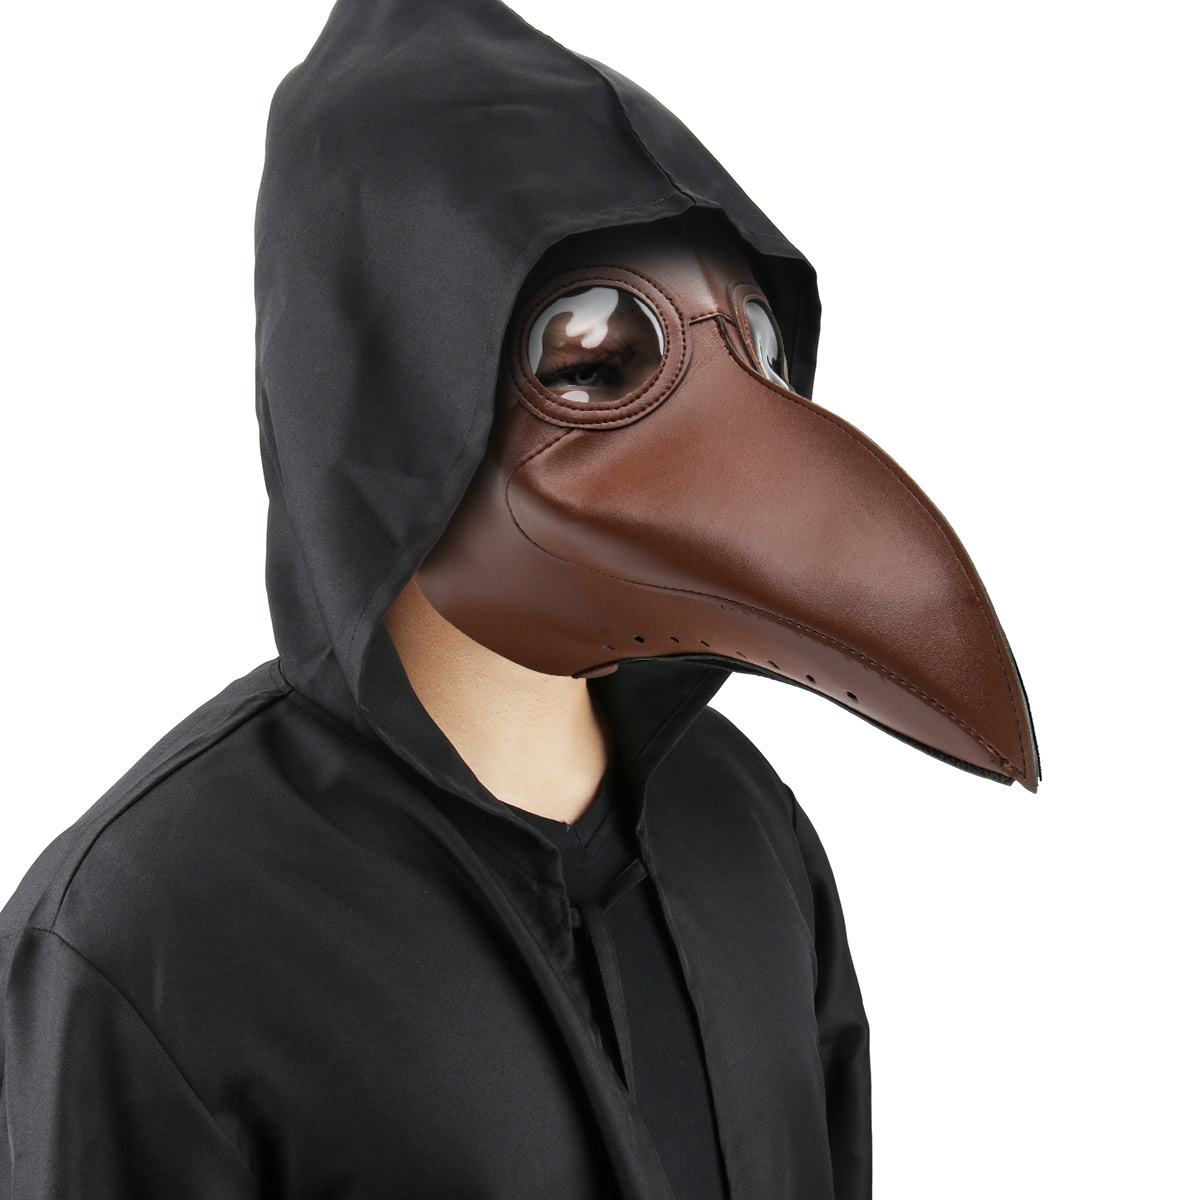 Birds Beak Masks Cospaly Dr. Beulenpest Steampunk Plague Doctor Mask In Stock